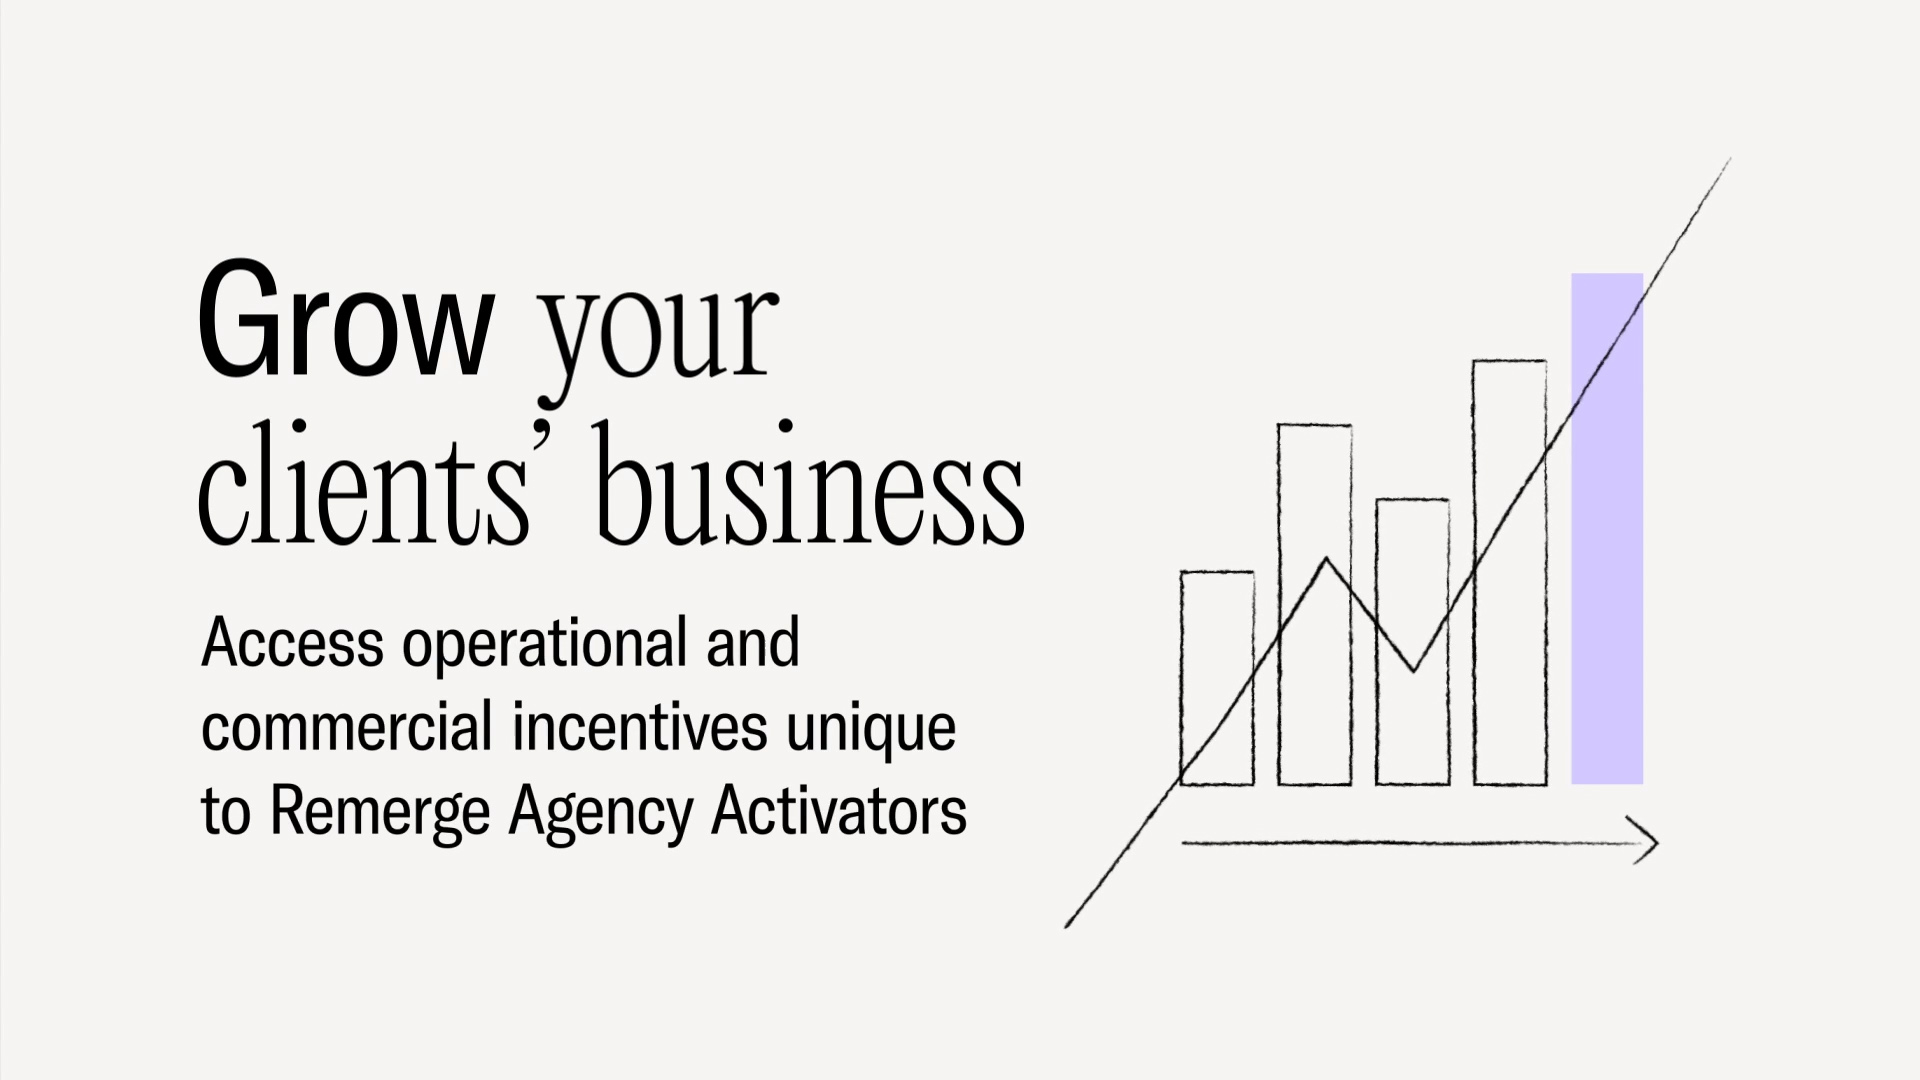 Introducing Remerge Agency Activators